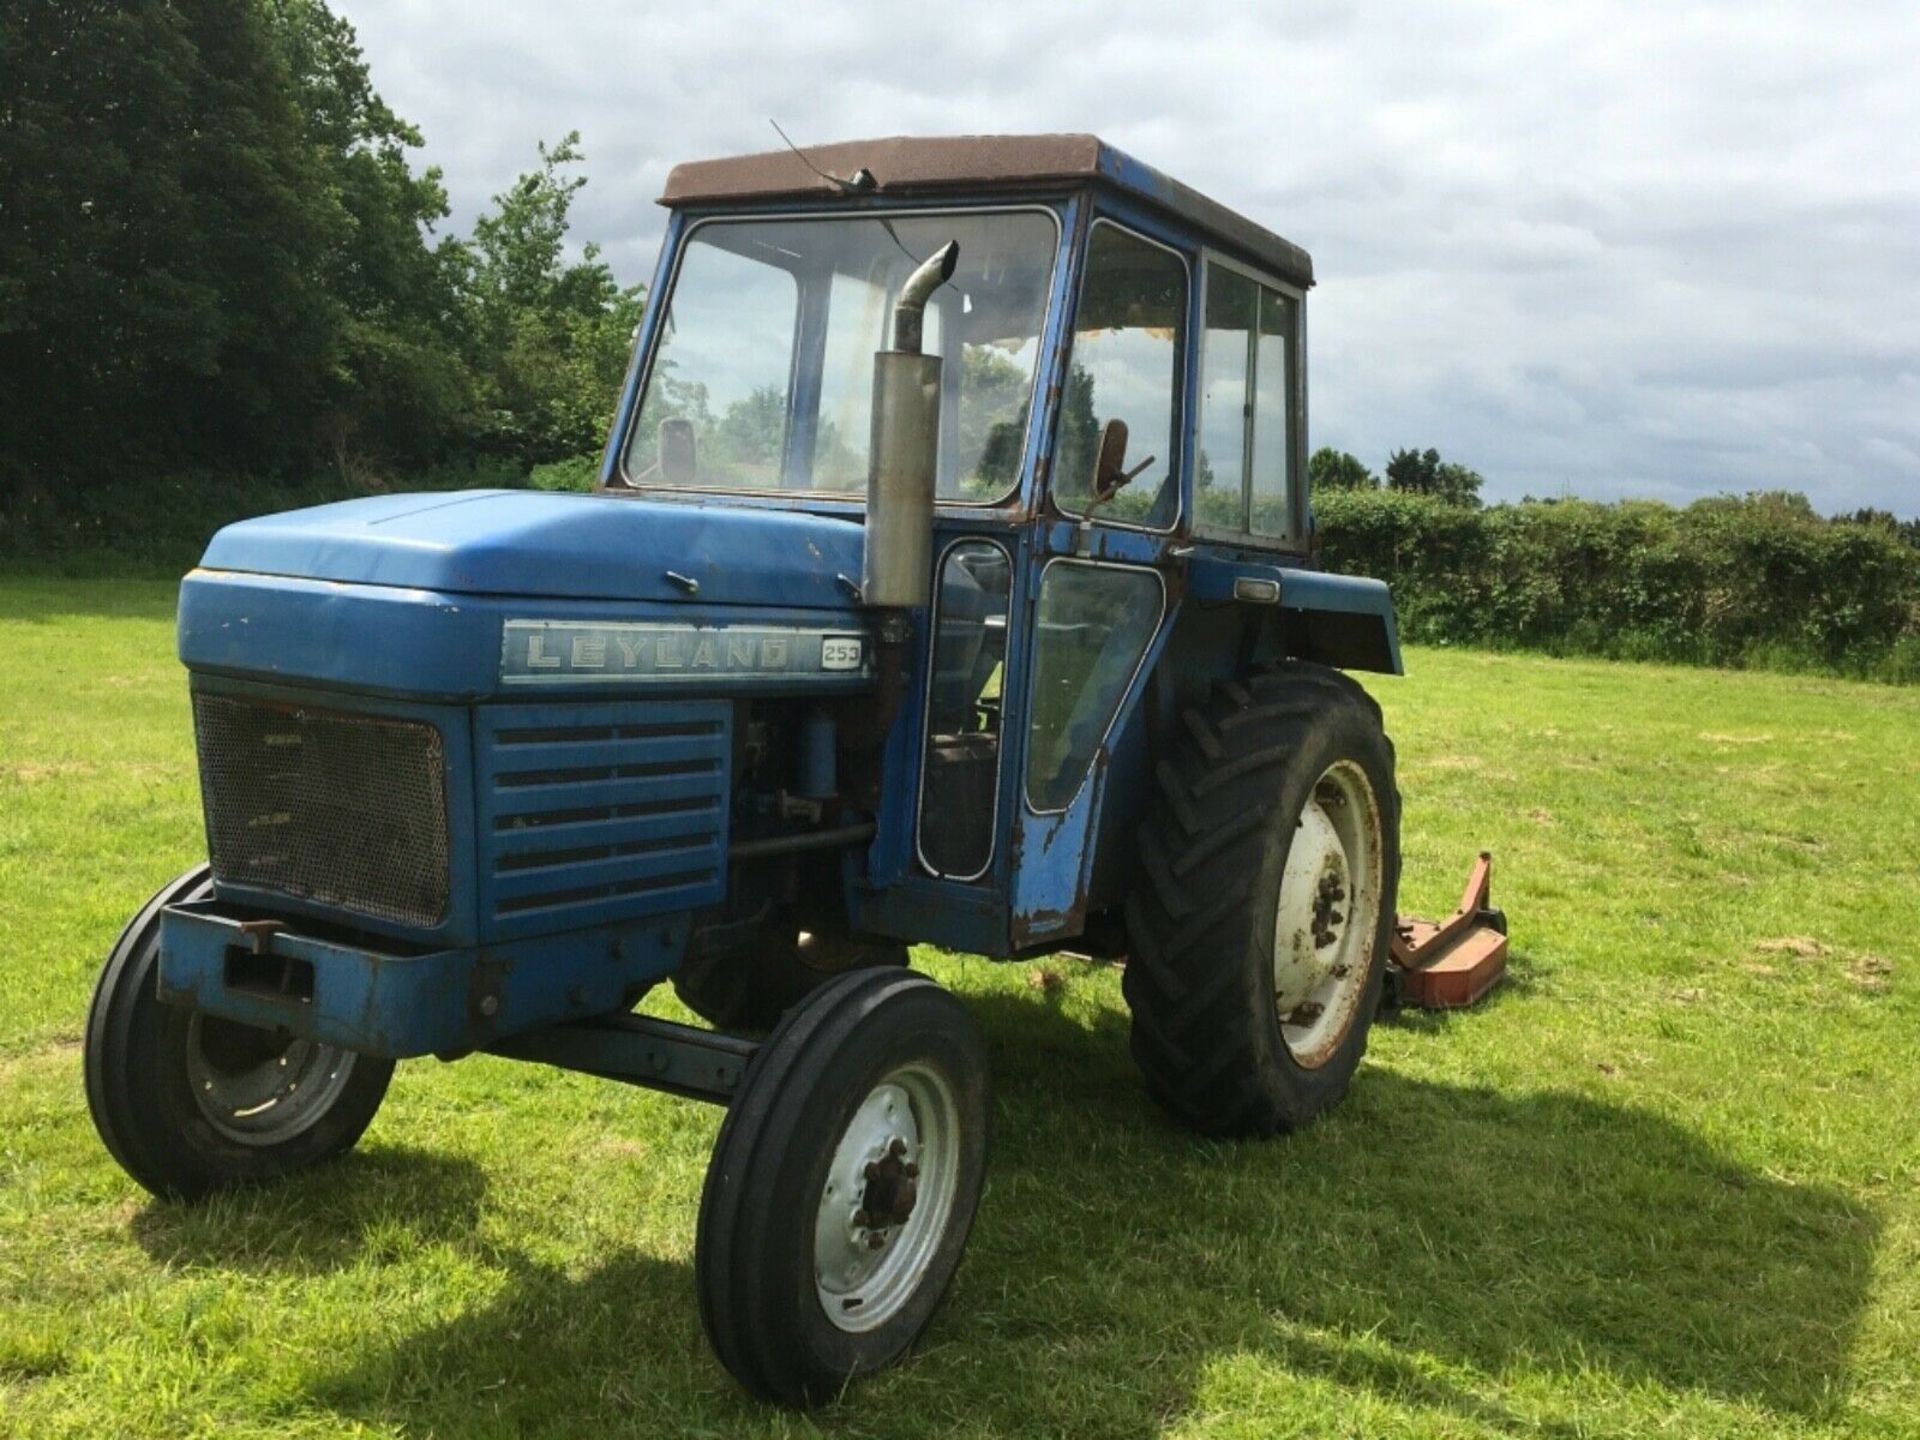 LEYLAND 253 TRACTOR 2WD DIESEL TRACTOR, RUNS & WORKS AS IT SHOULD *NO VAT* - Image 2 of 3